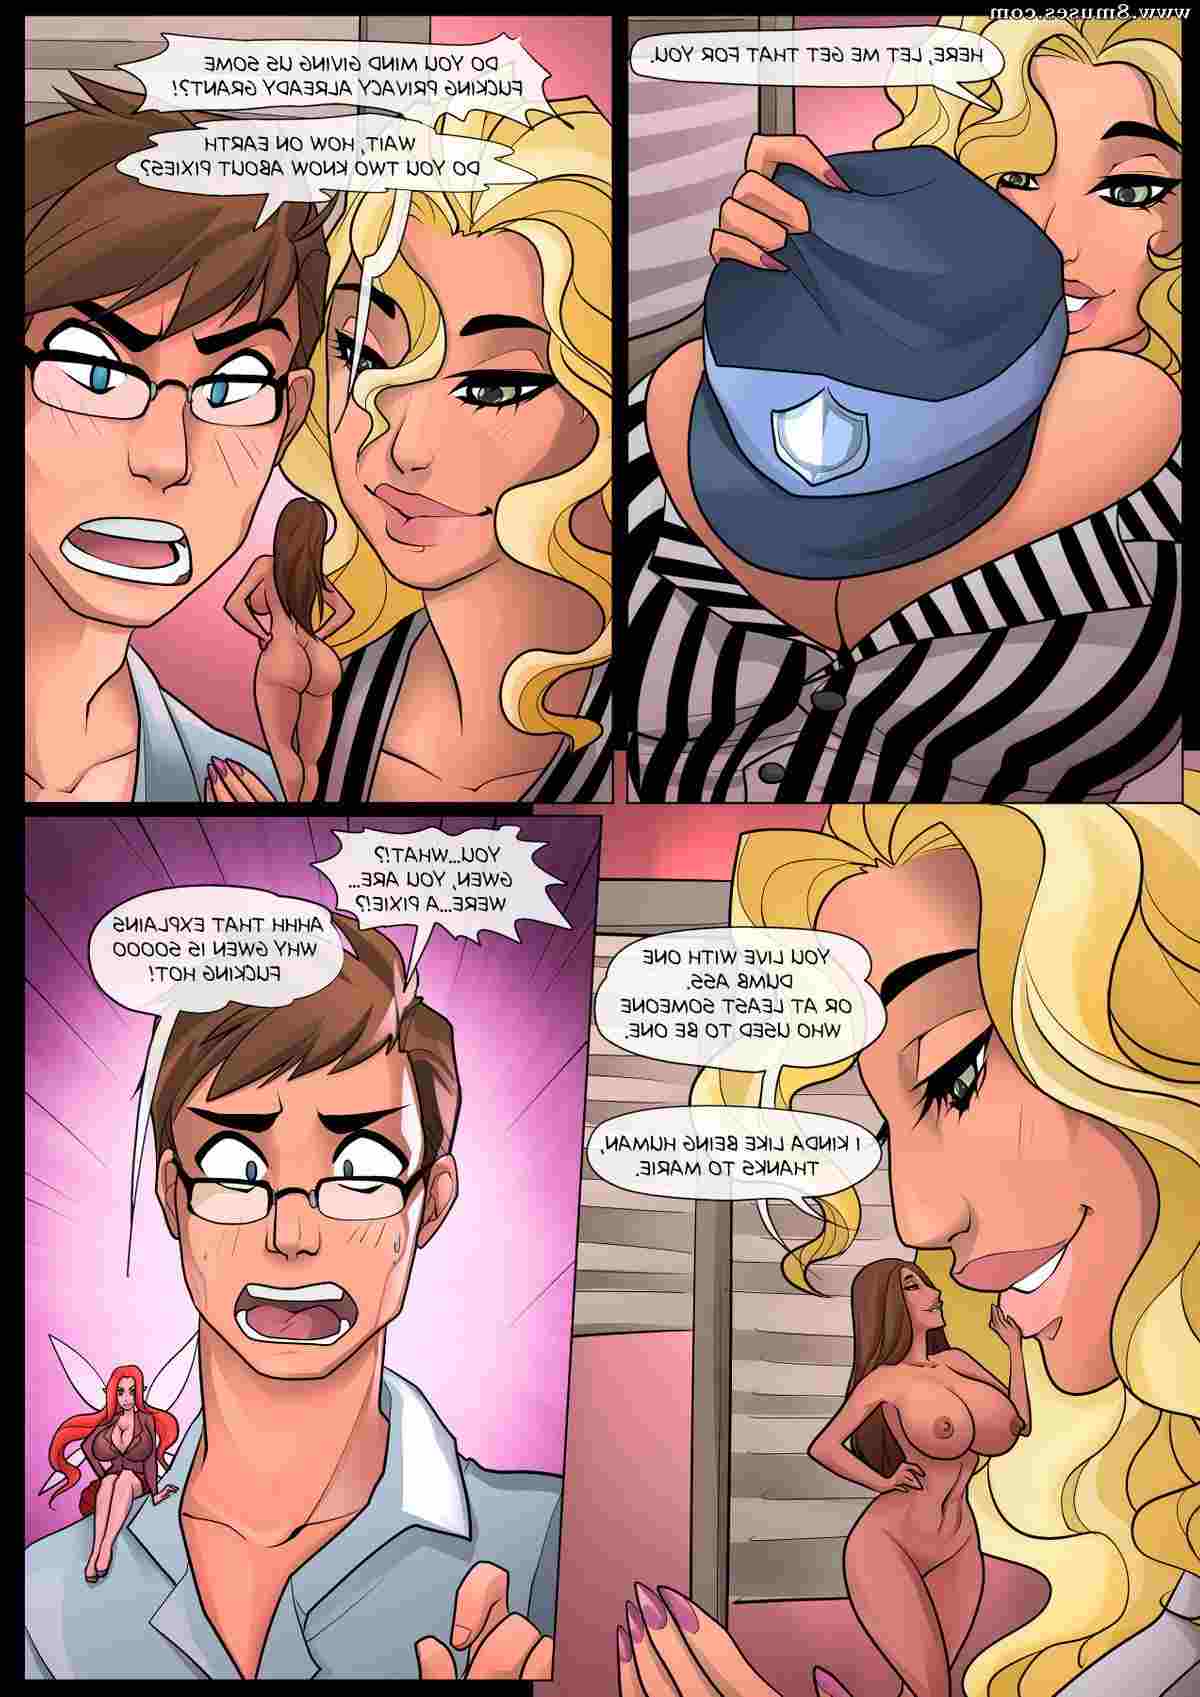 ZZZ-Comics/Pocket-Pixie-in-the-City Pocket_Pixie_in_the_City__8muses_-_Sex_and_Porn_Comics_20.jpg